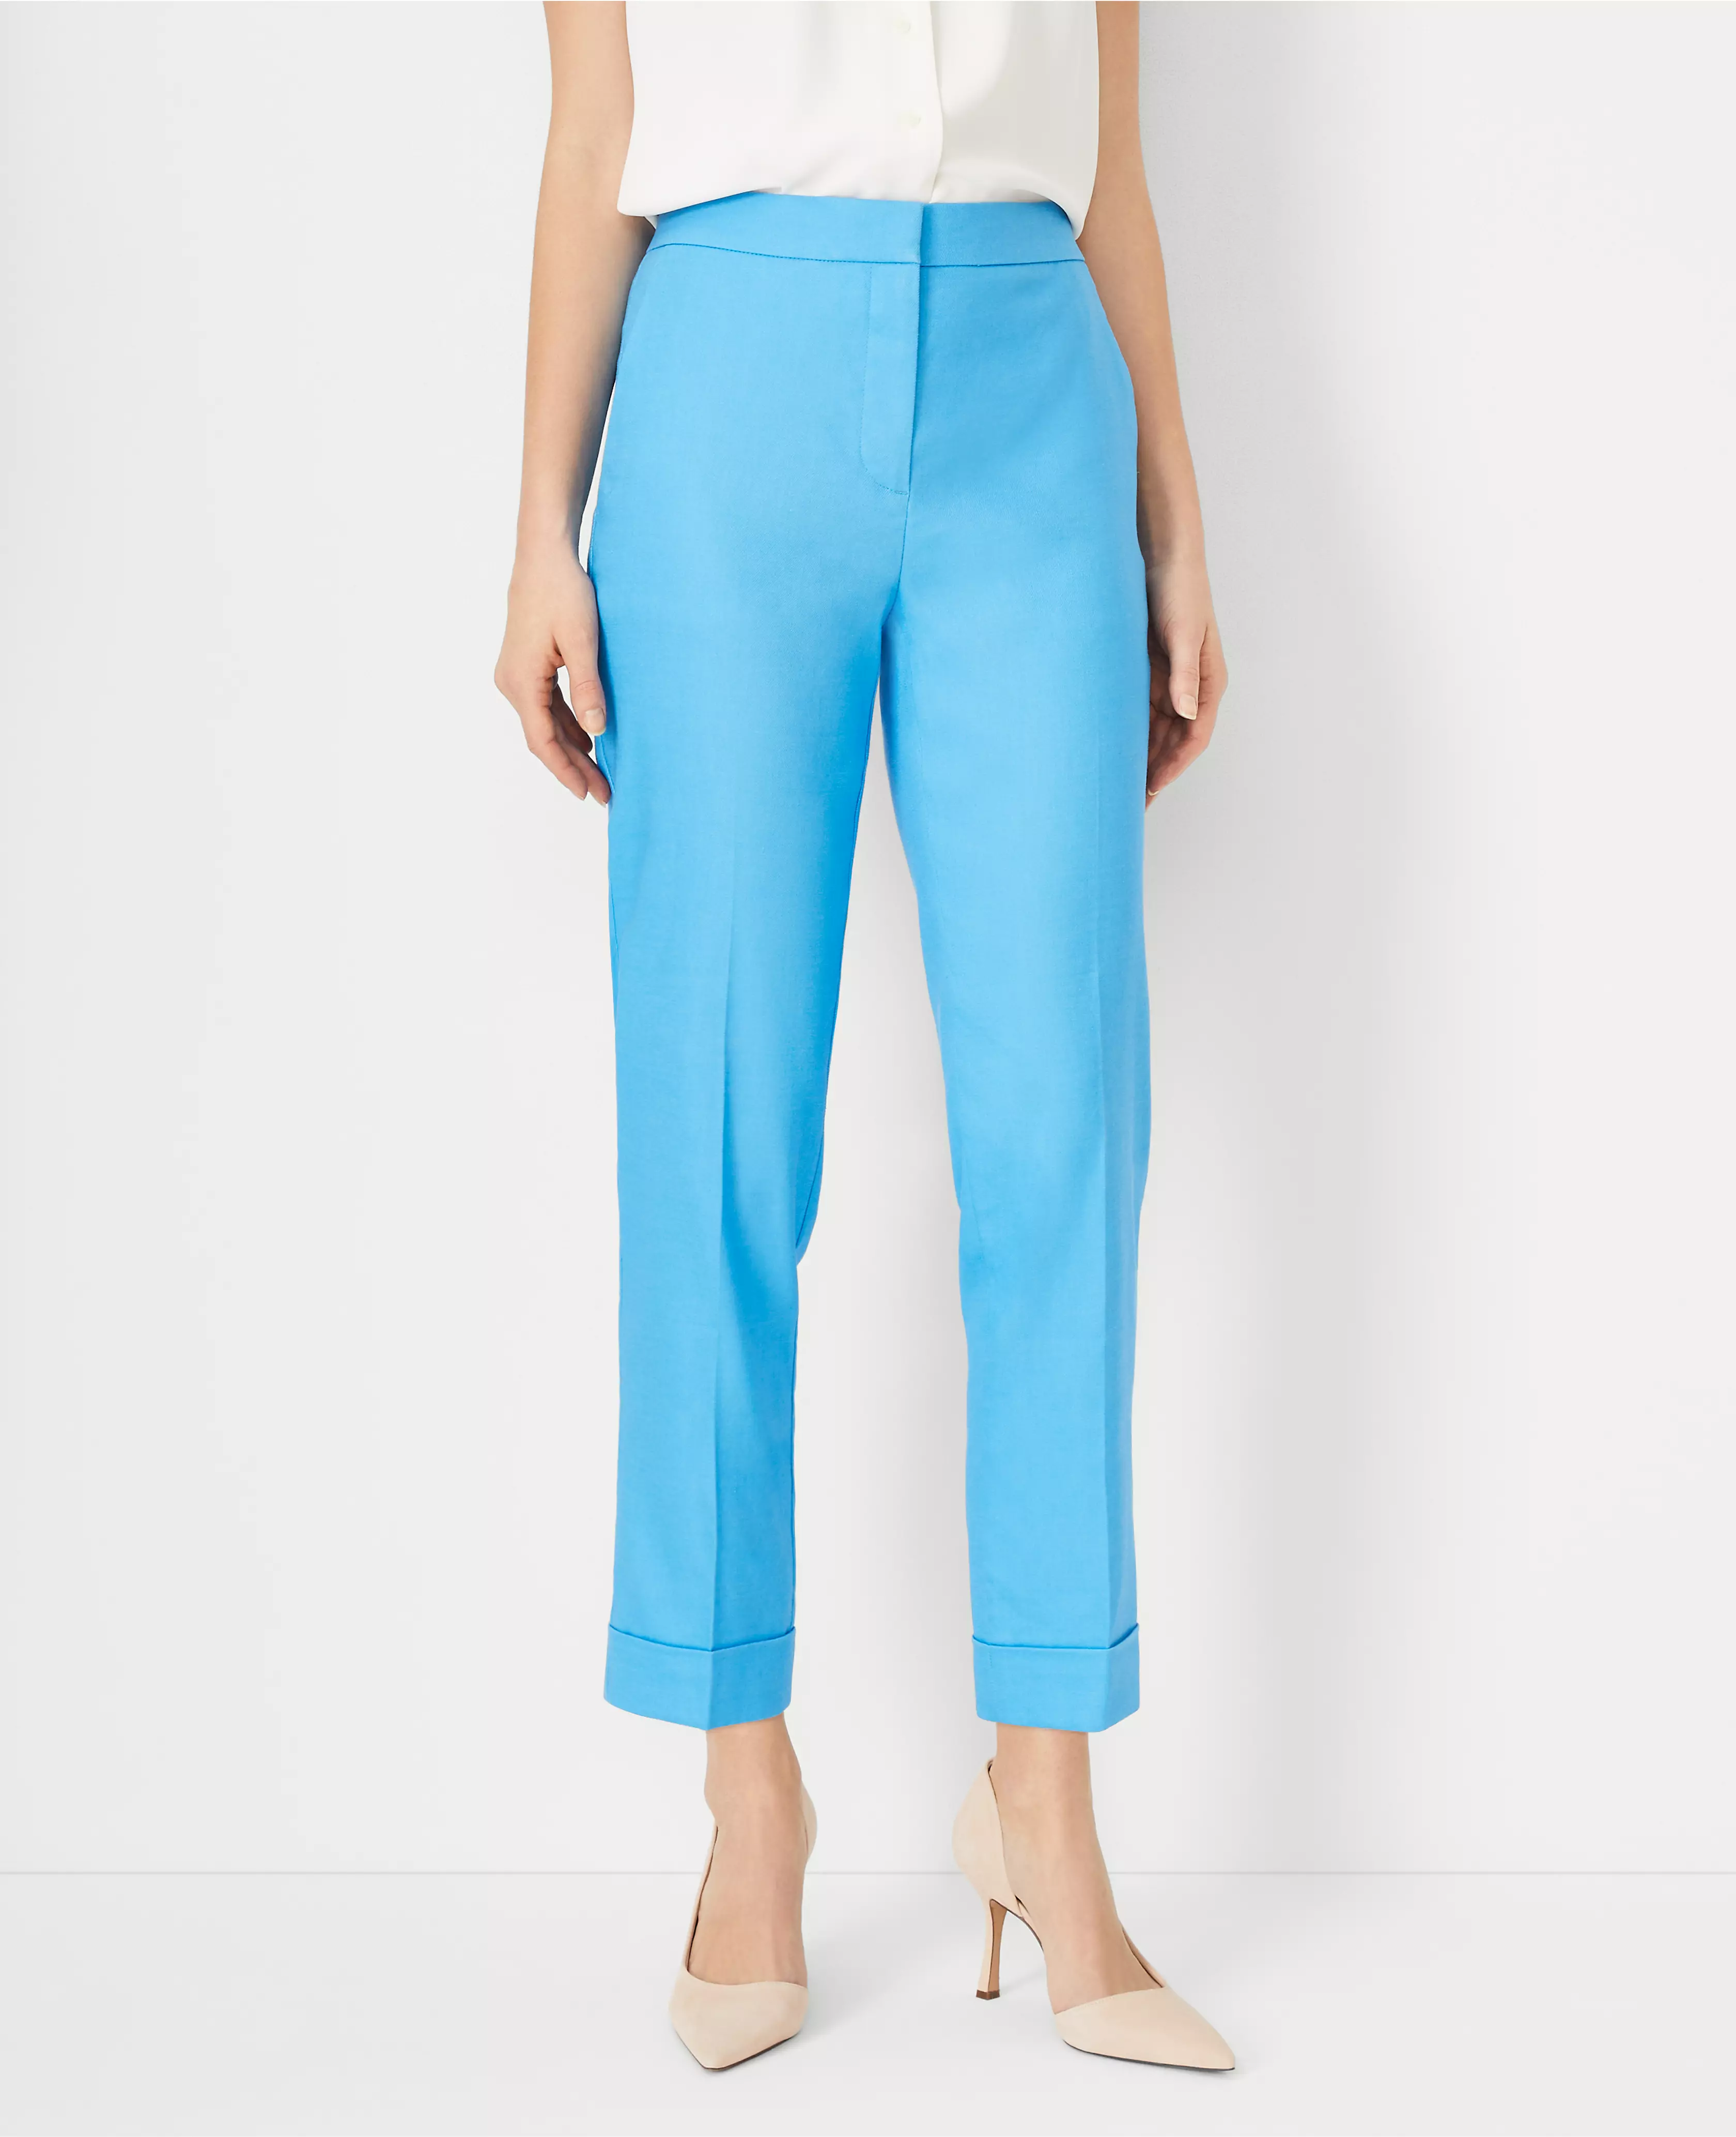 The Petite High Rise Eva Ankle Pant in Linen Blend - Curvy Fit